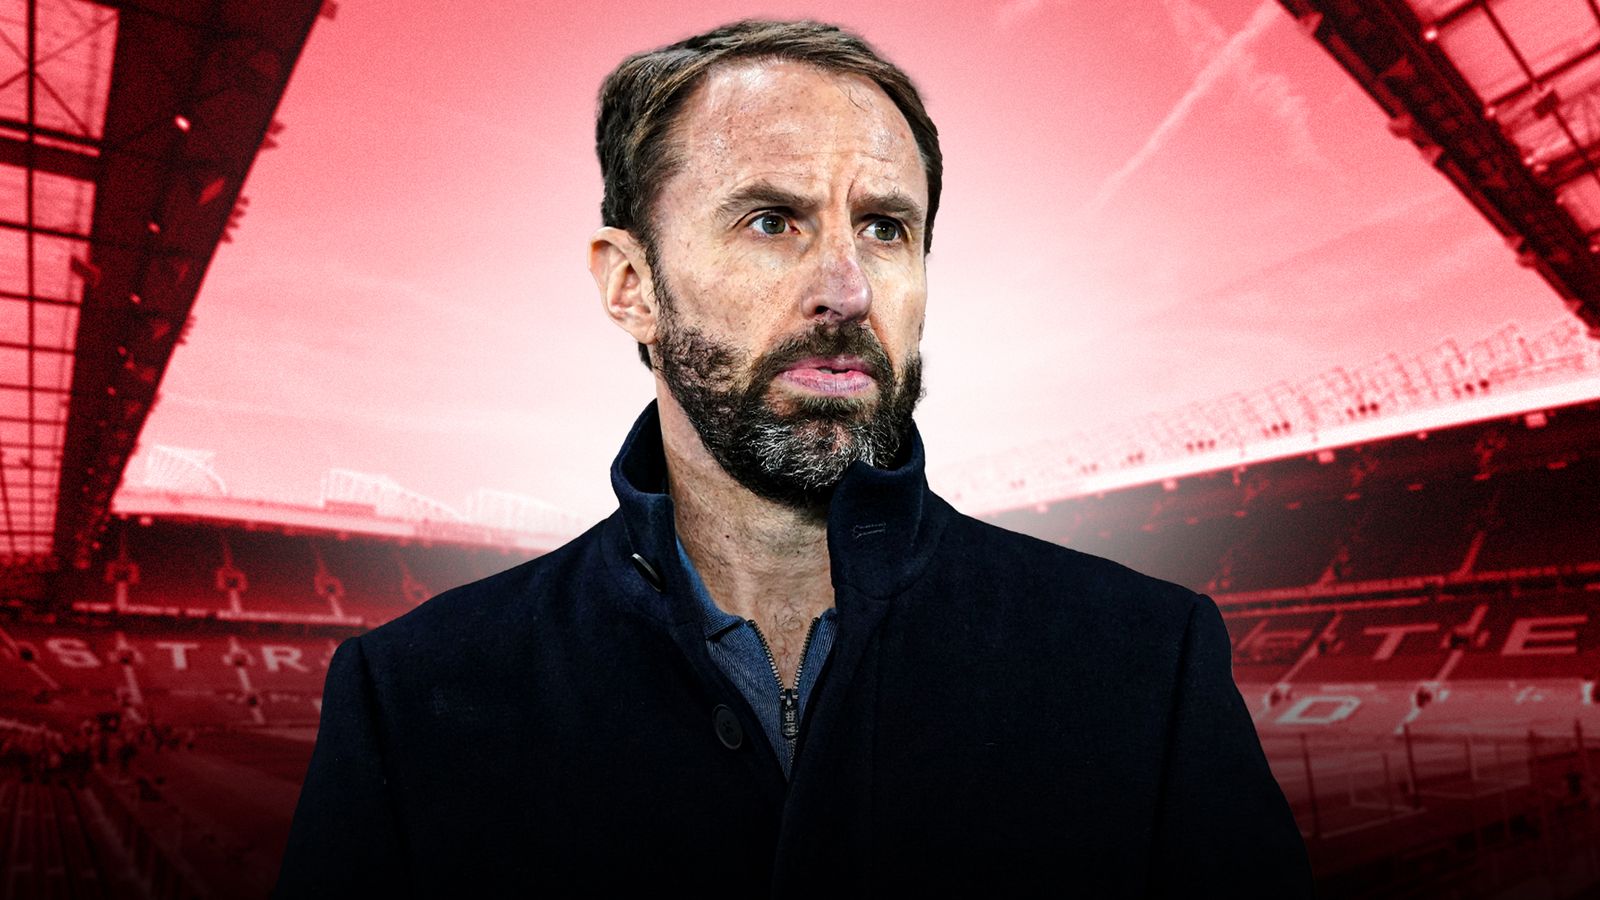 Gareth Southgate stays committed to England amid Manchester United season review | Football News